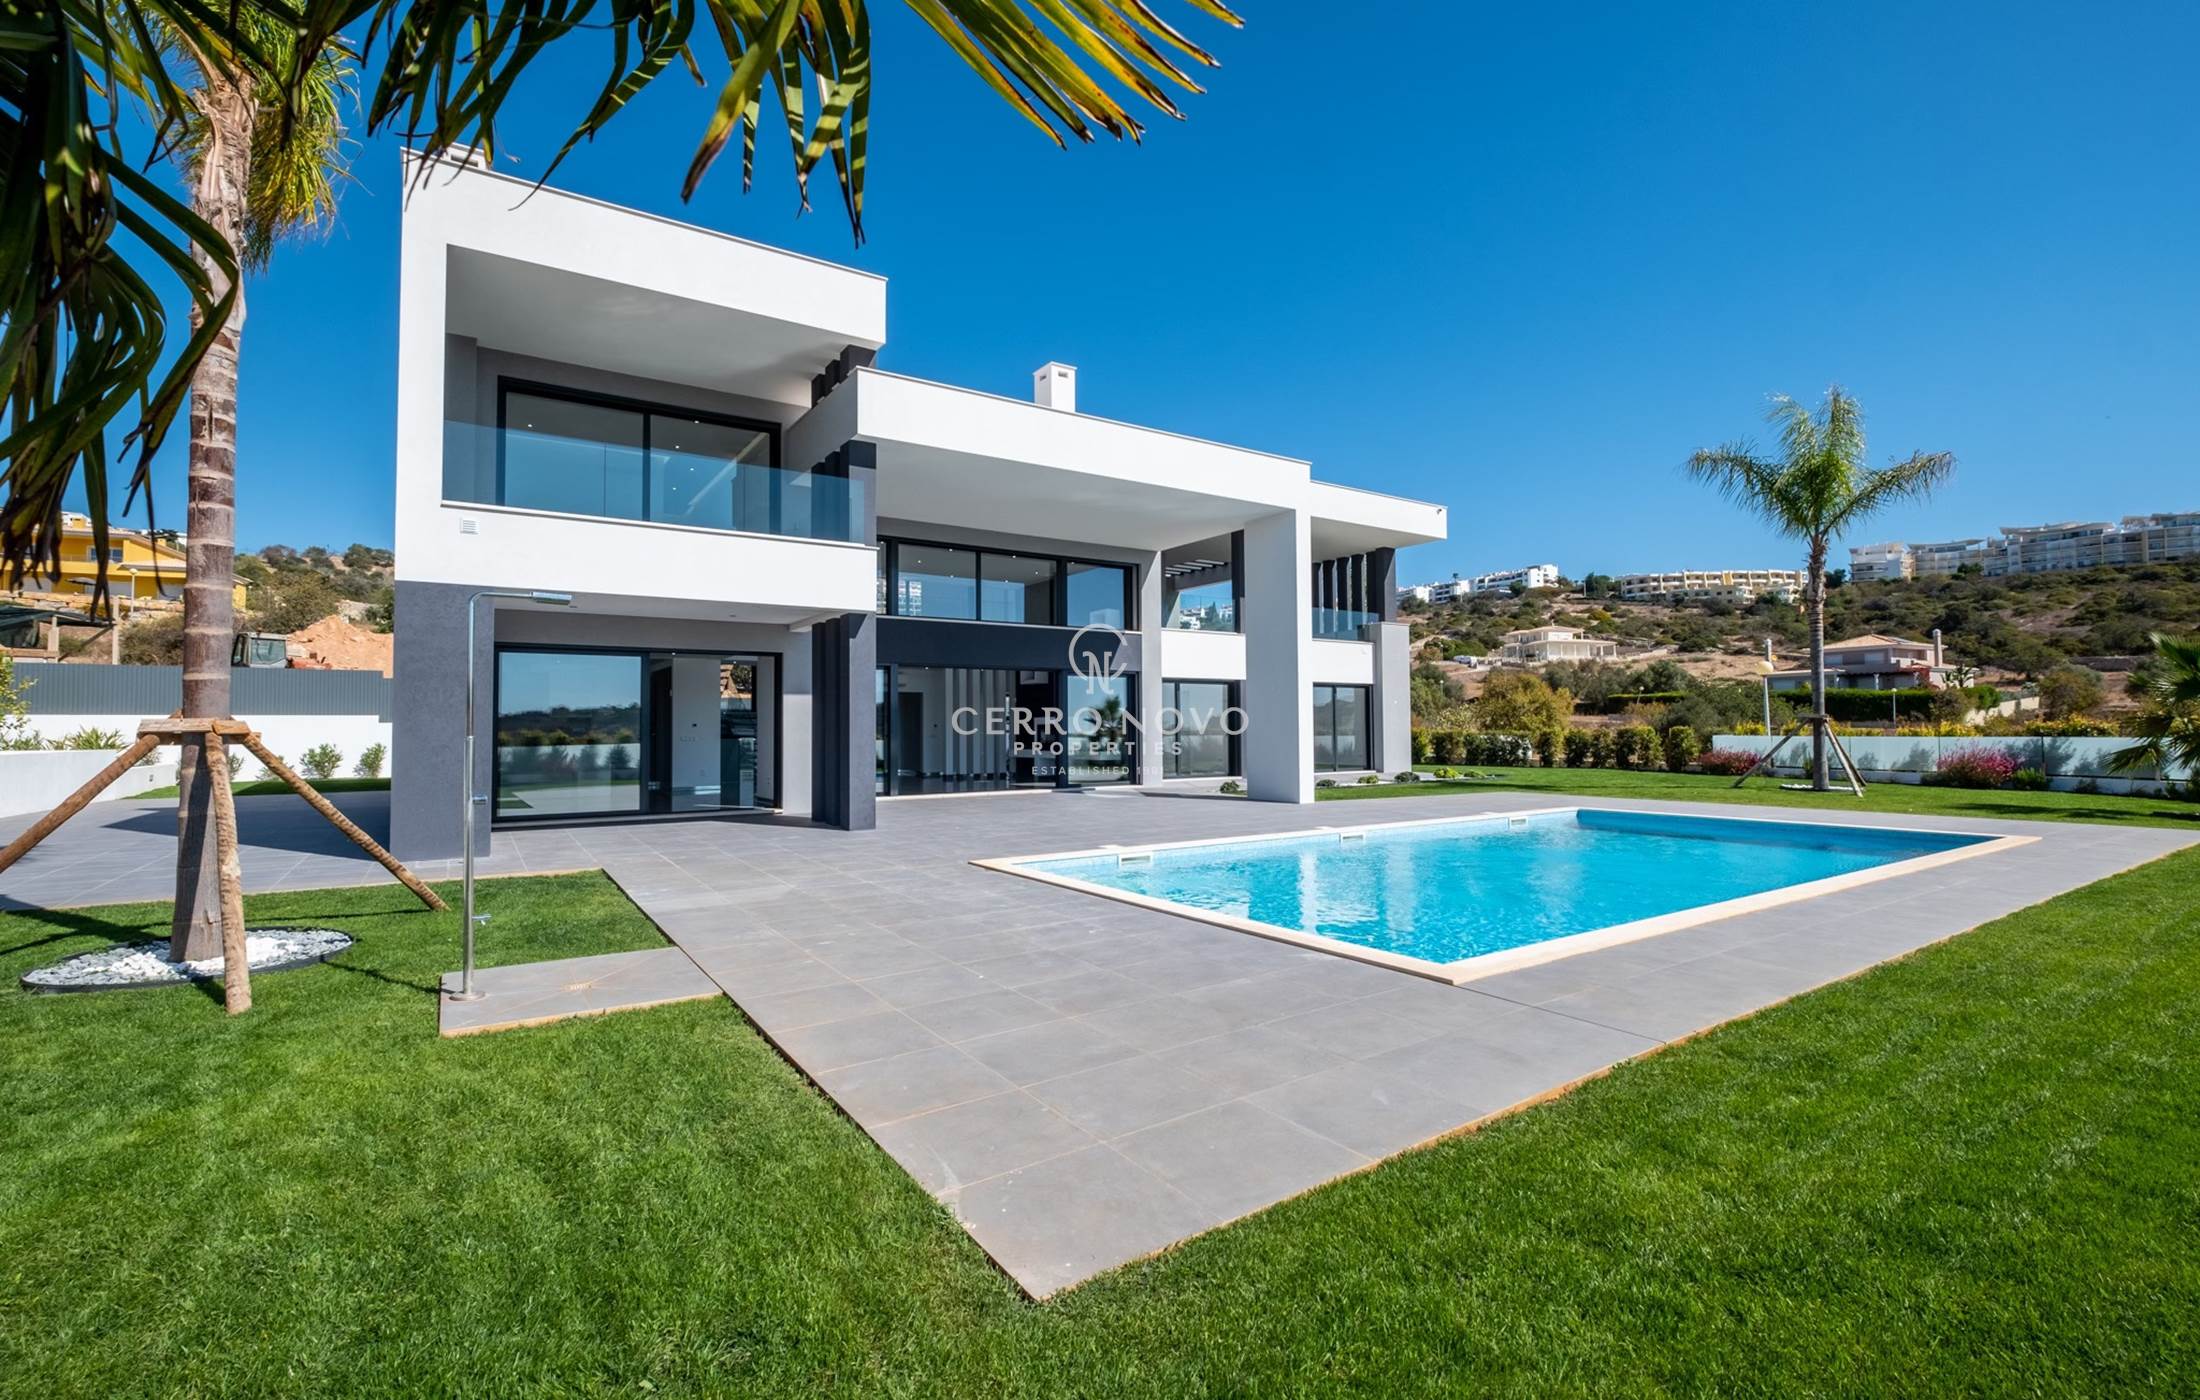 A luxuriously appointed contemporary villa with five bedroom suites